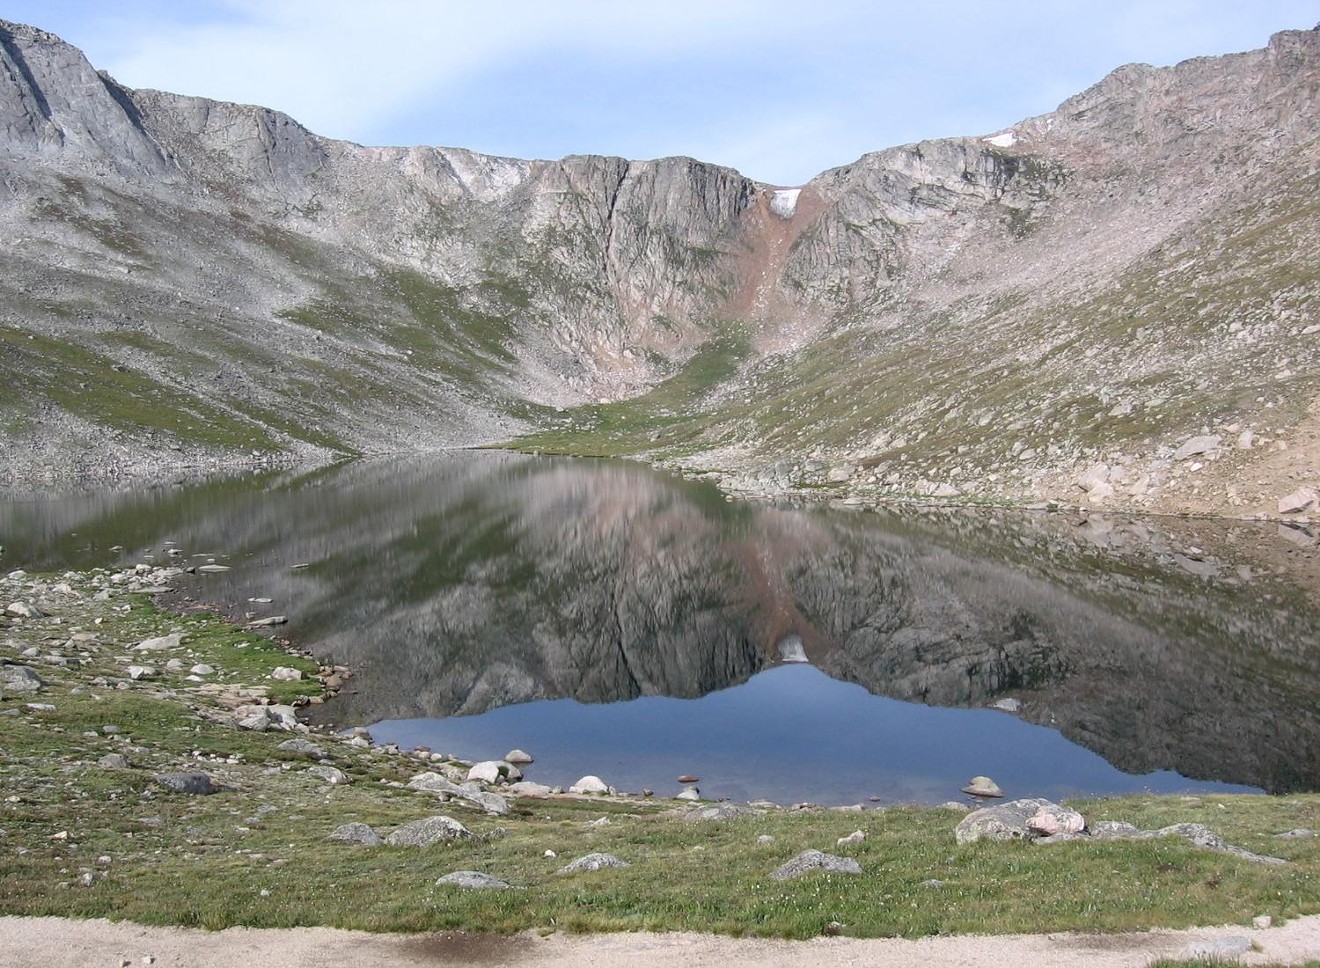 Summit Lake on what's now known as Mount Evans.